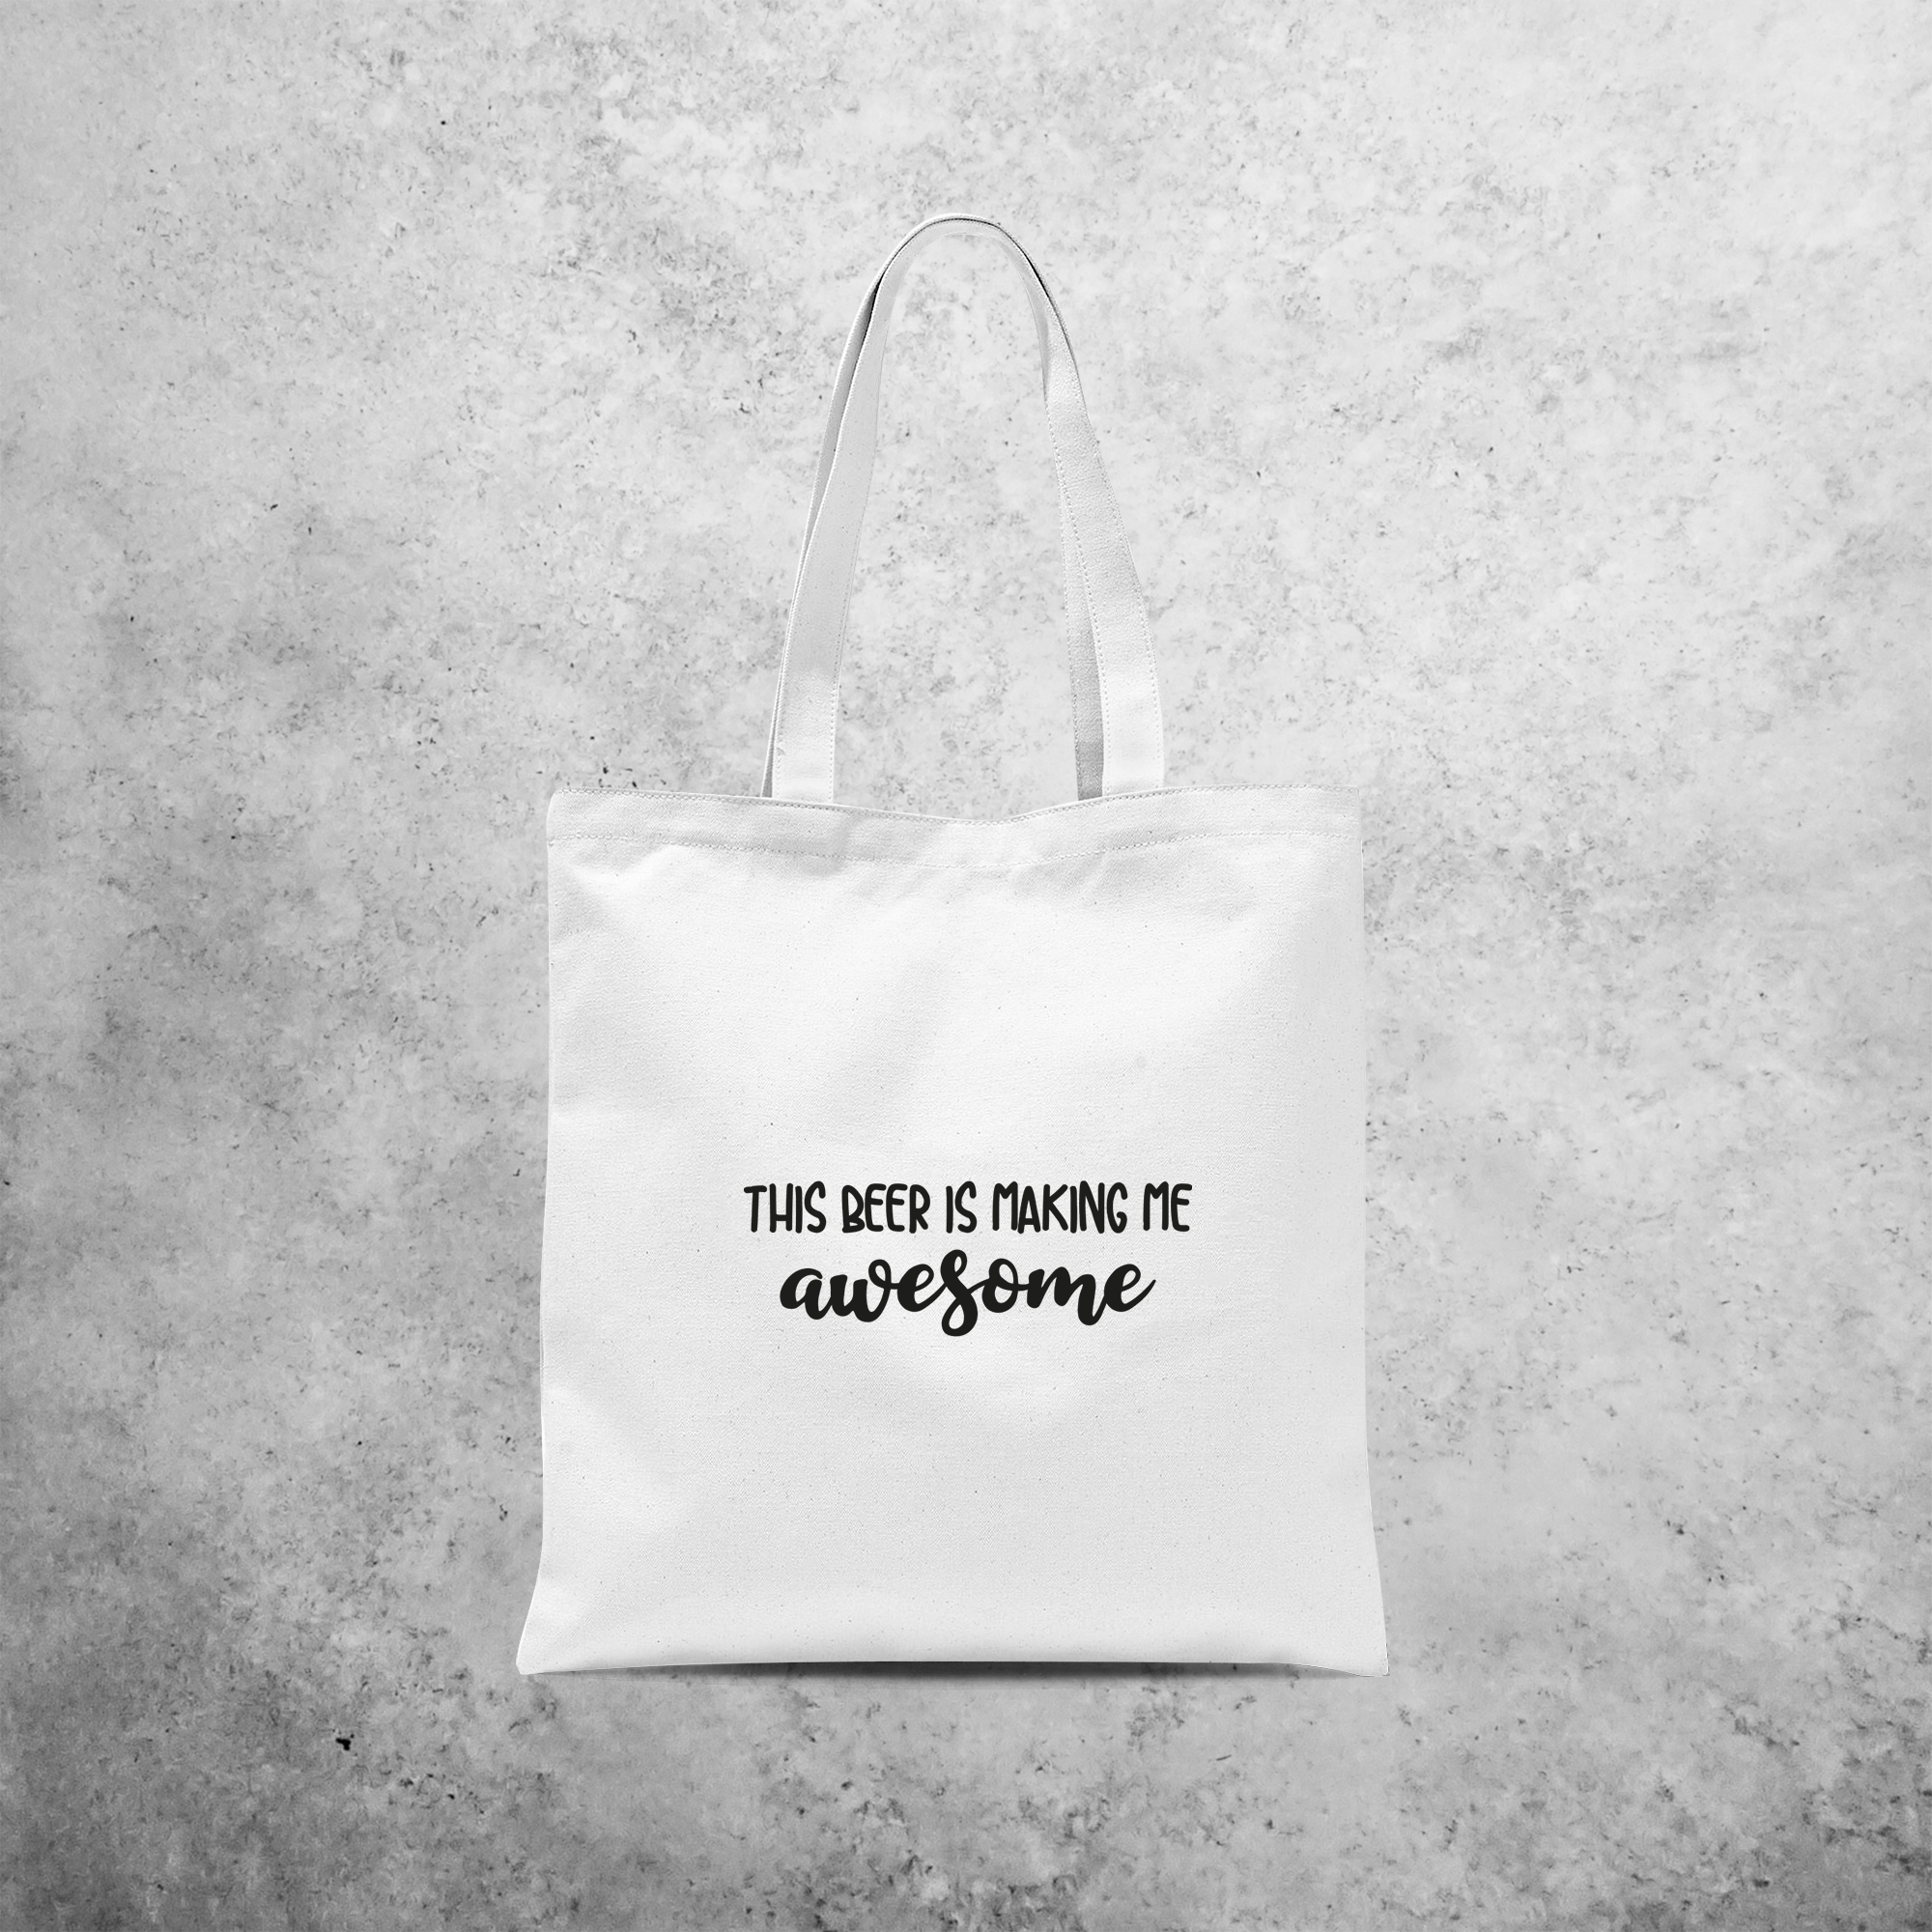 'This beer is making me awesome' tote bag